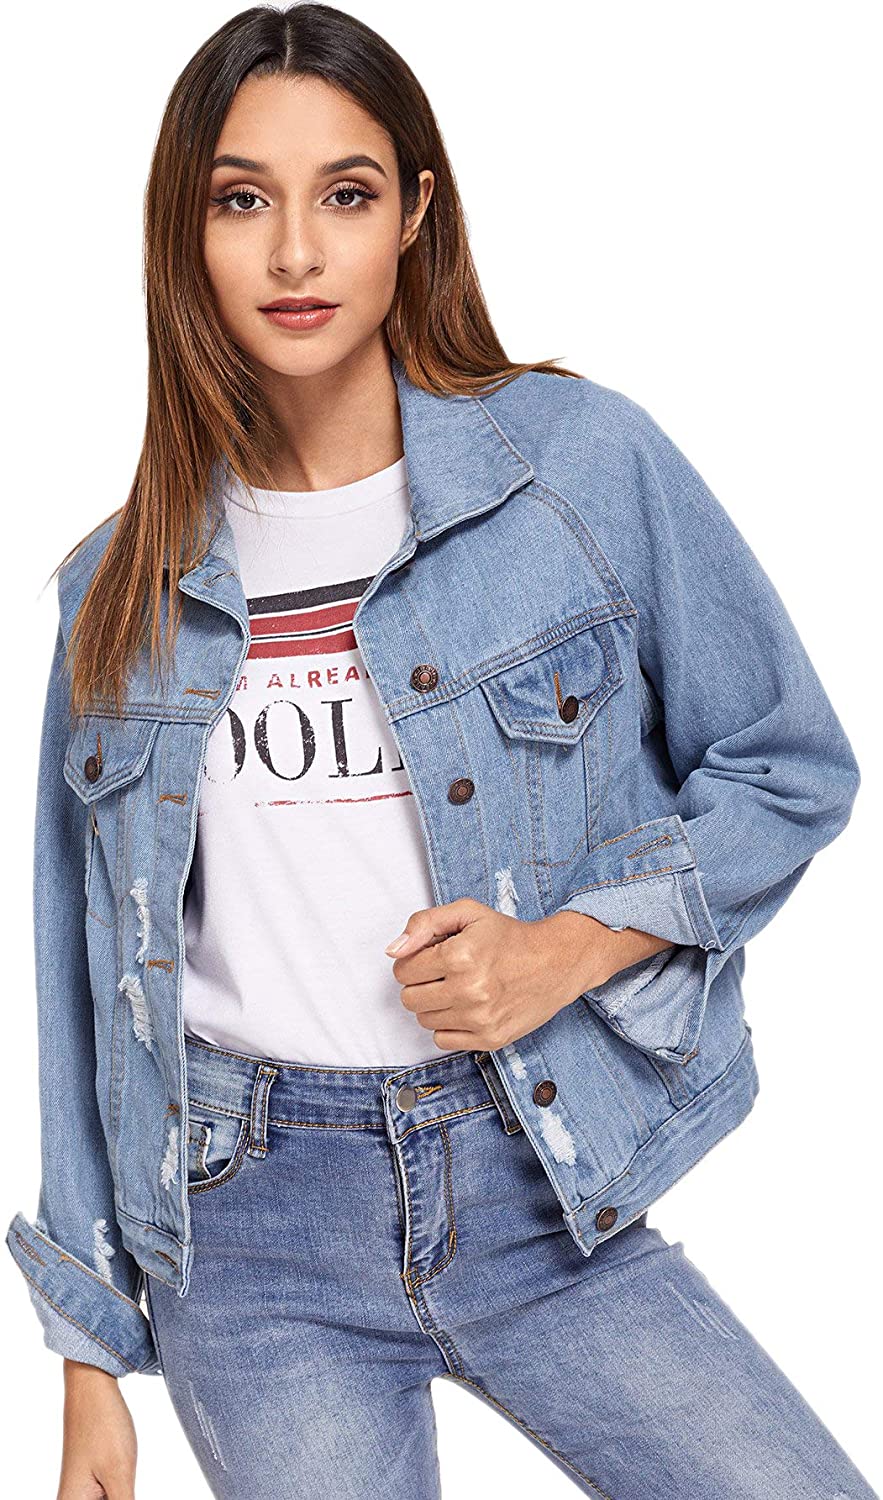 Floerns Womens Classic Button Up Denim Jean Jacket with Pockets